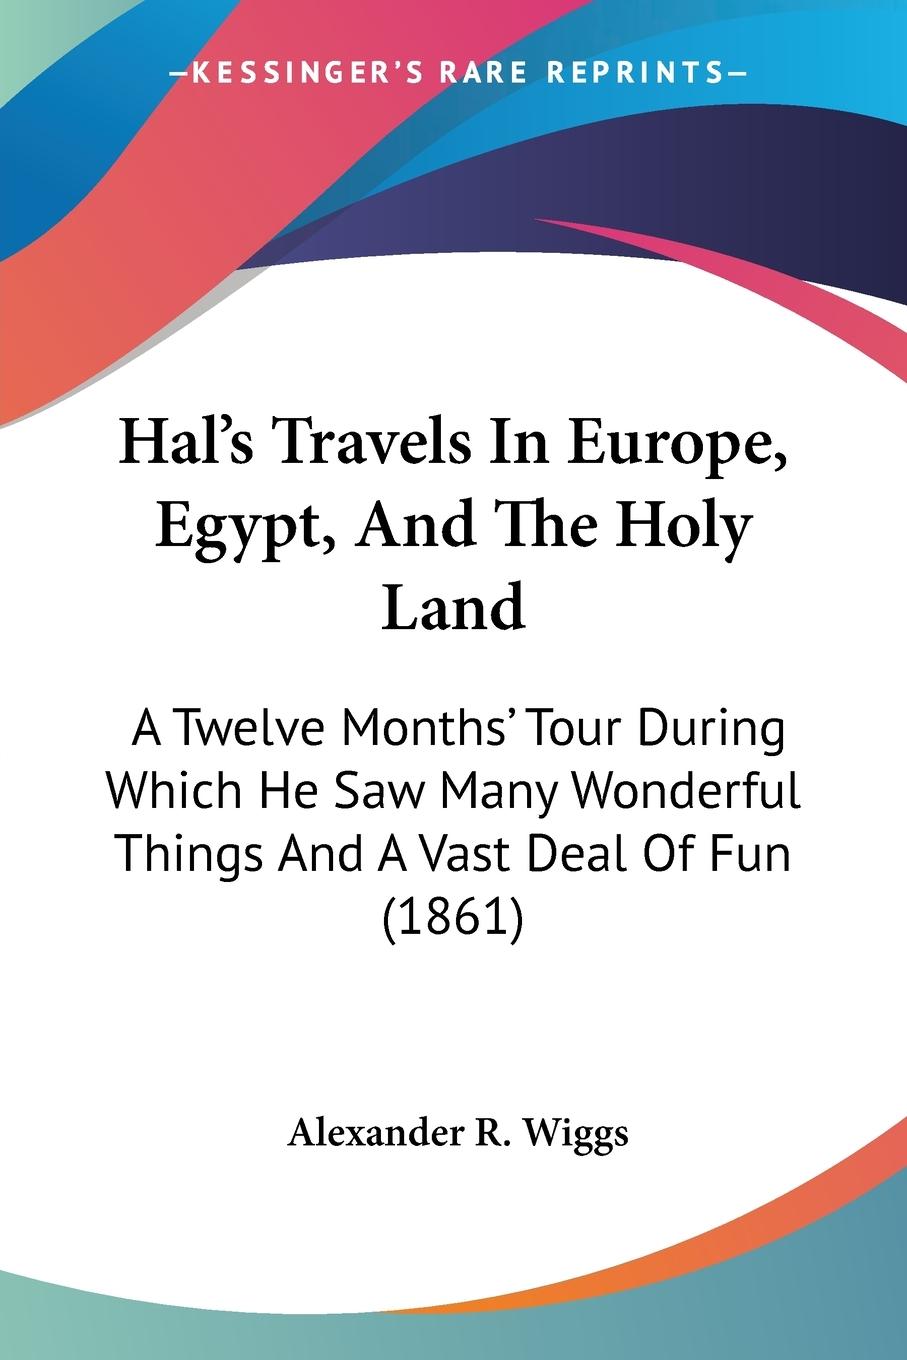 Hal s Travels In Europe, Egypt, And The Holy Land - Wiggs, Alexander R.